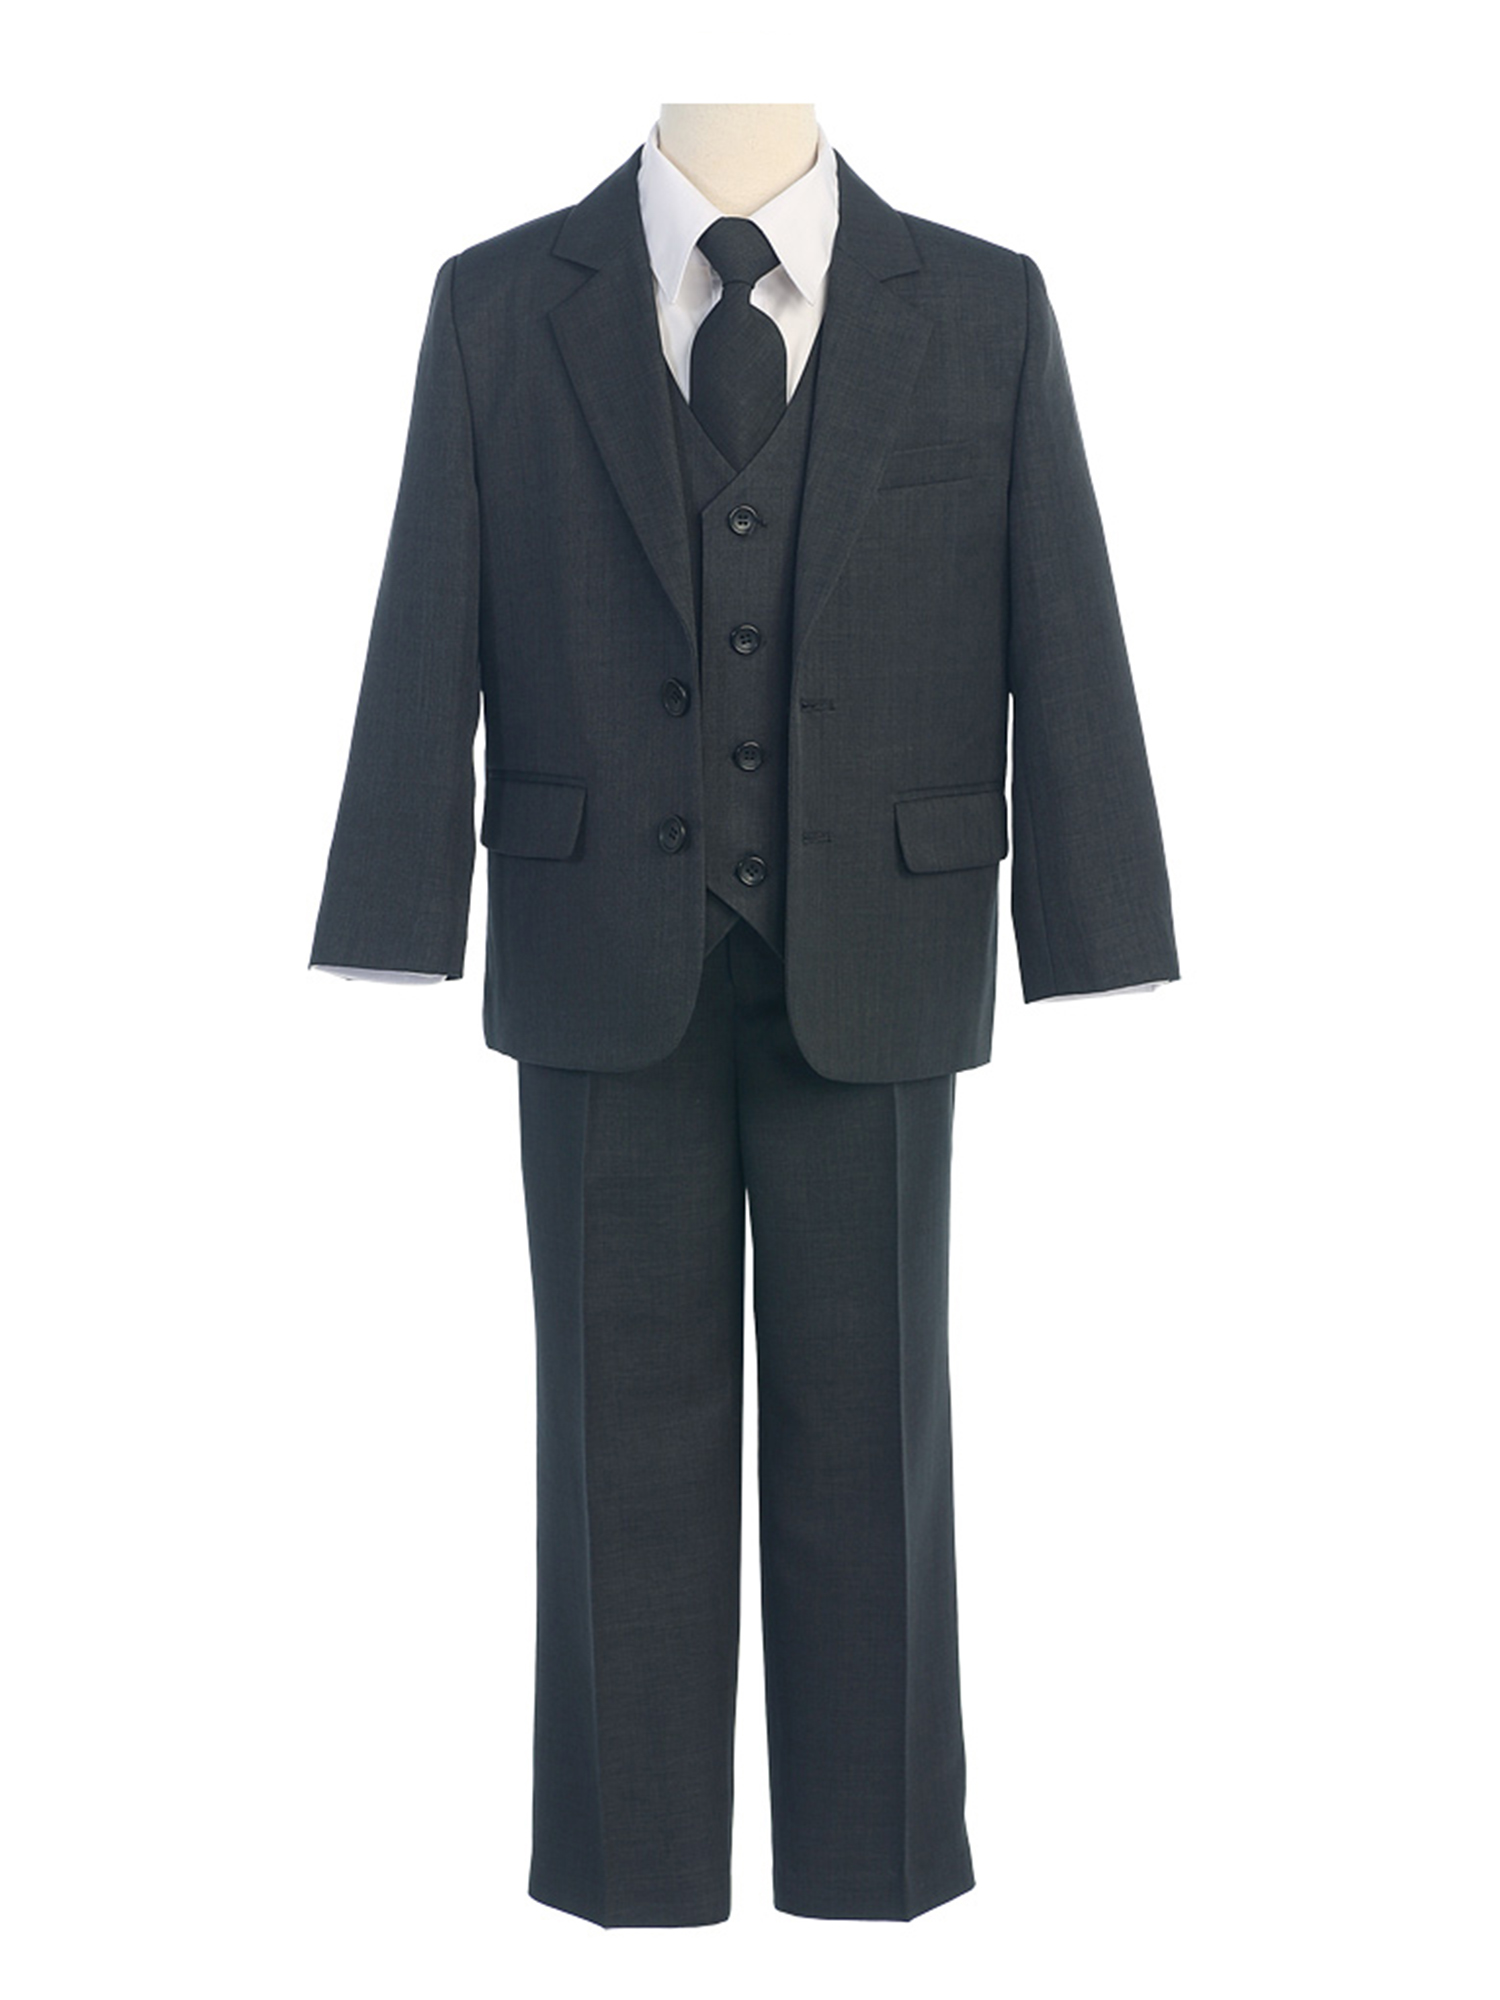 COLE Boys Suit with Shirt and Vest (5-Piece) - Charcoal Grey - Size 7